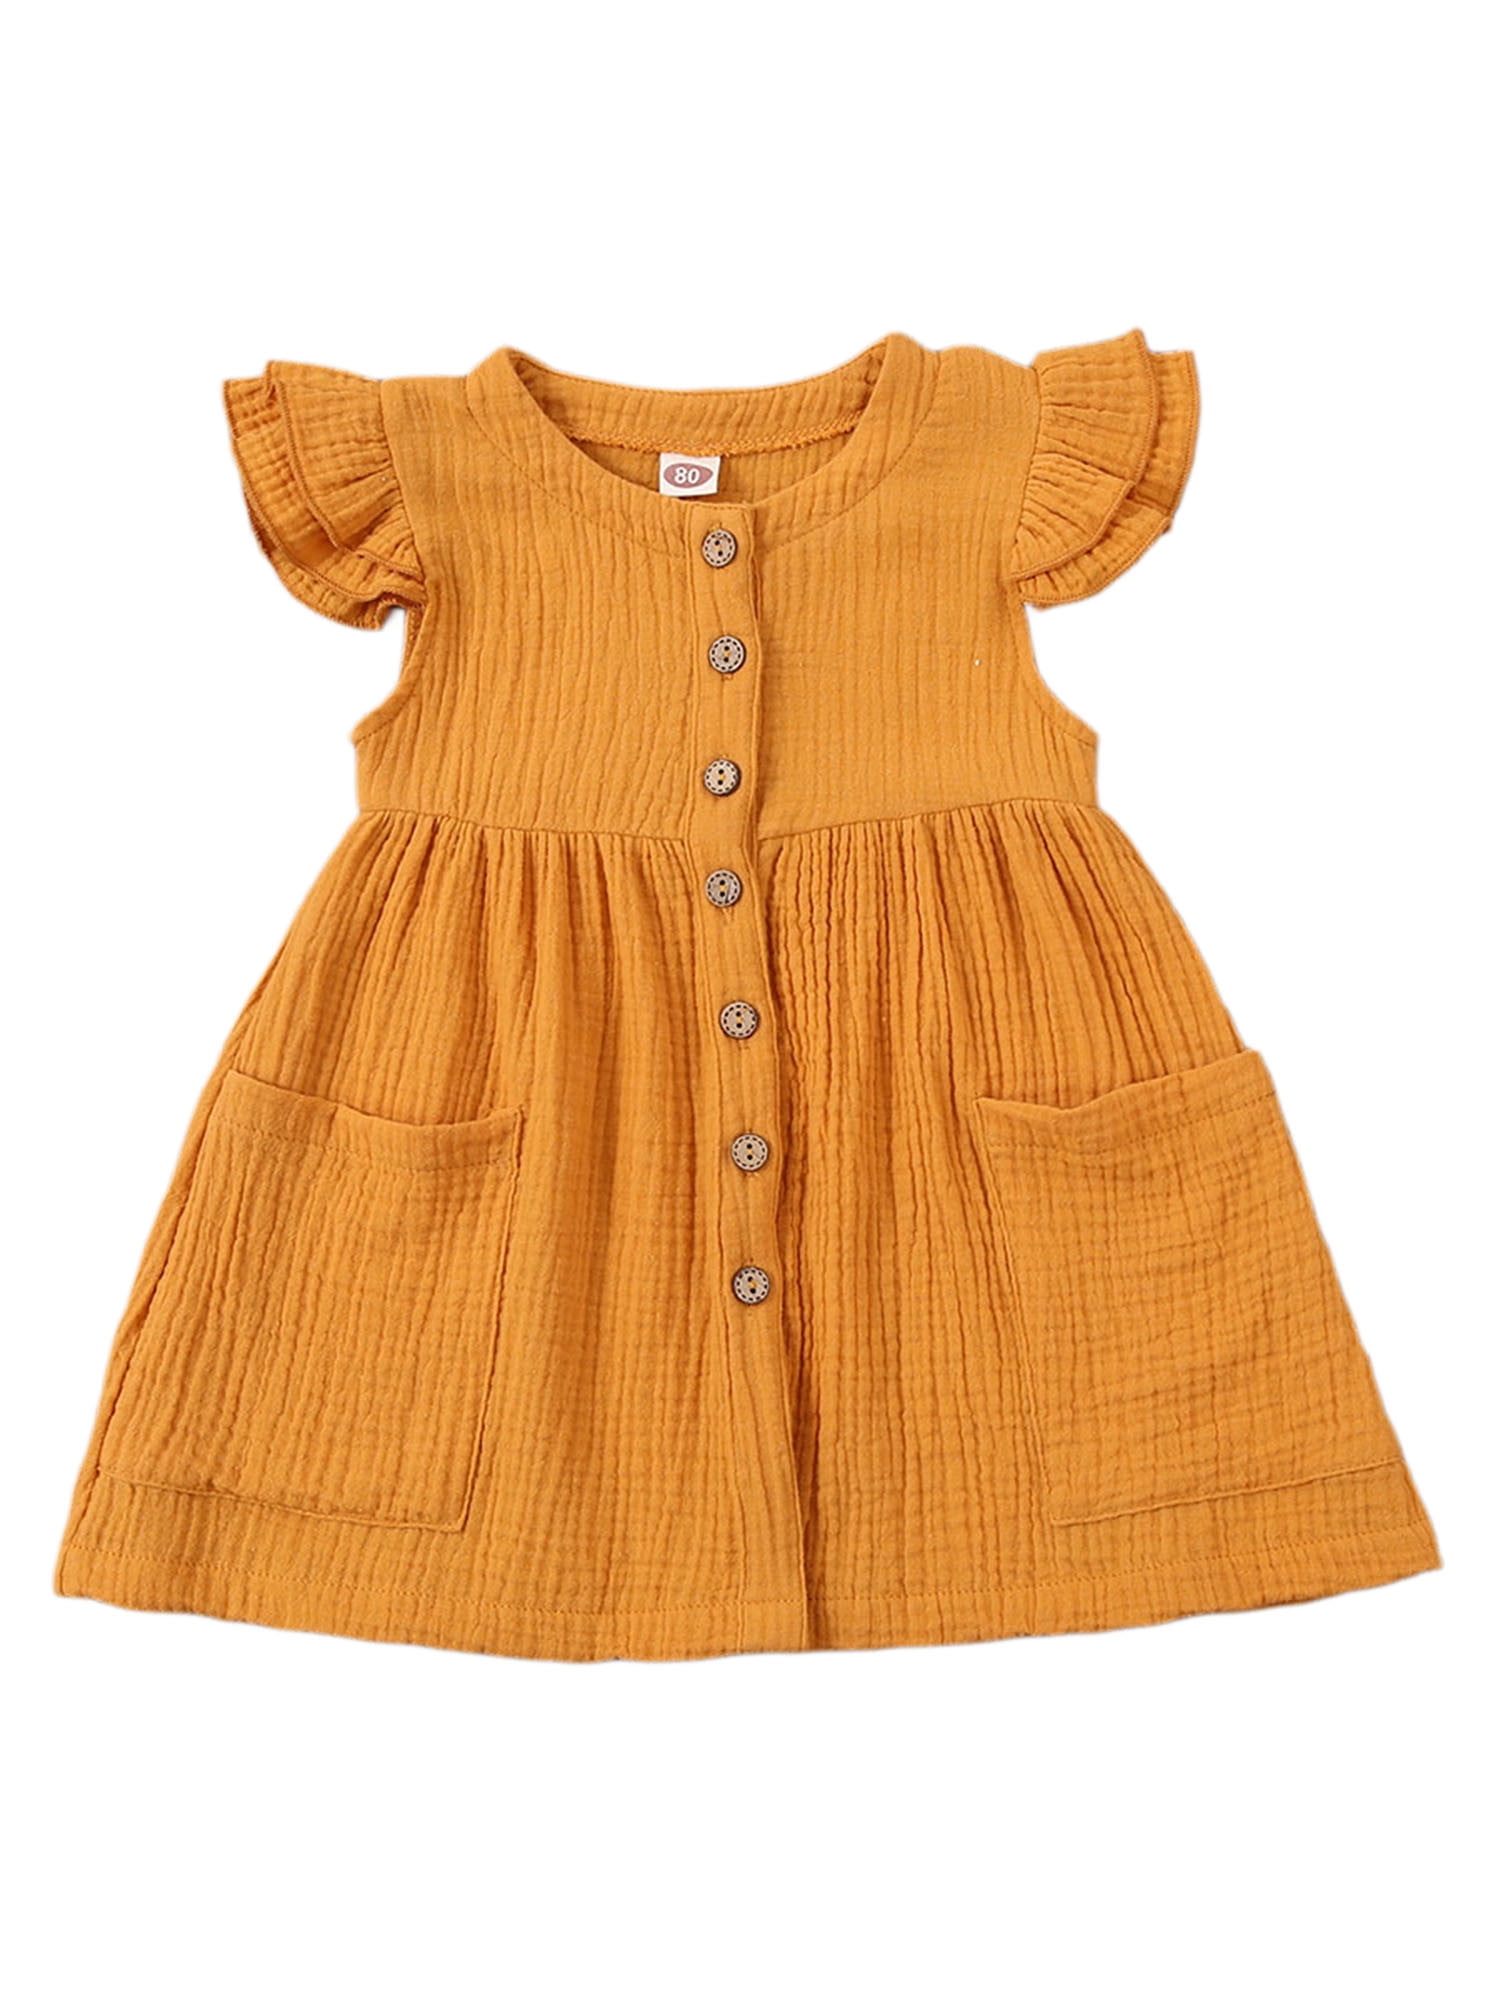 NEW AGE 2-3 YEARS OLD GIRLS PARTY SKIRT PINAFORE DRESS TOP YELLOW SUMMER HOLS 